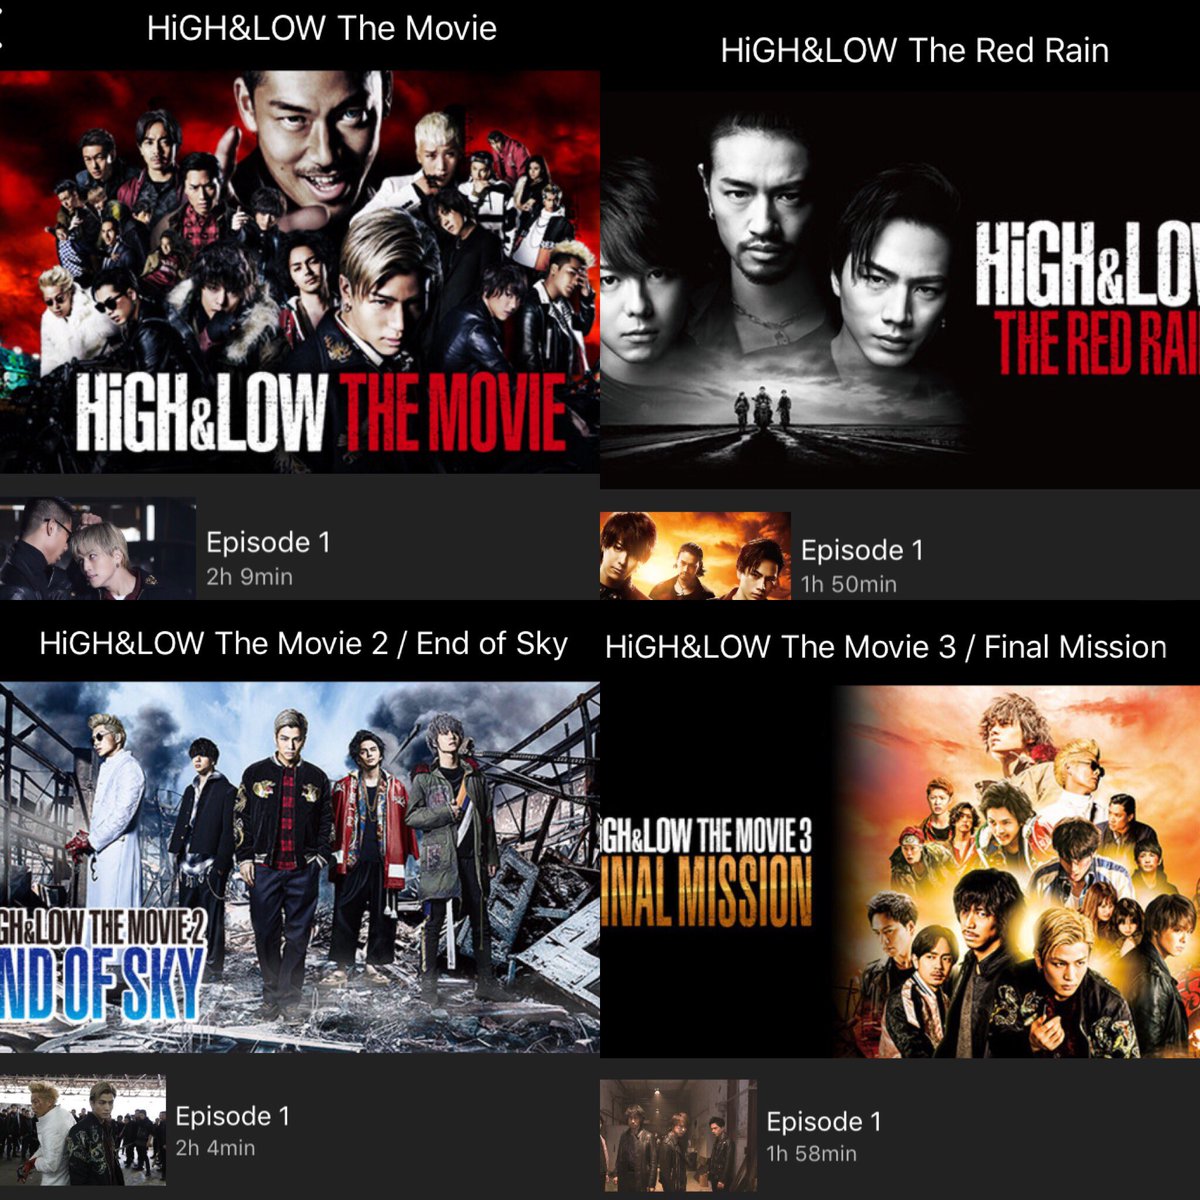 Yeonmi High Low The Movie High Low The Red Rain High Low The Movie 2 End Of Sky High Low The Movie 3 Final Mission ーーーー いろんな意味で予想外 それと自動再生の順番が違いますからね T Co I6atmcbr6j